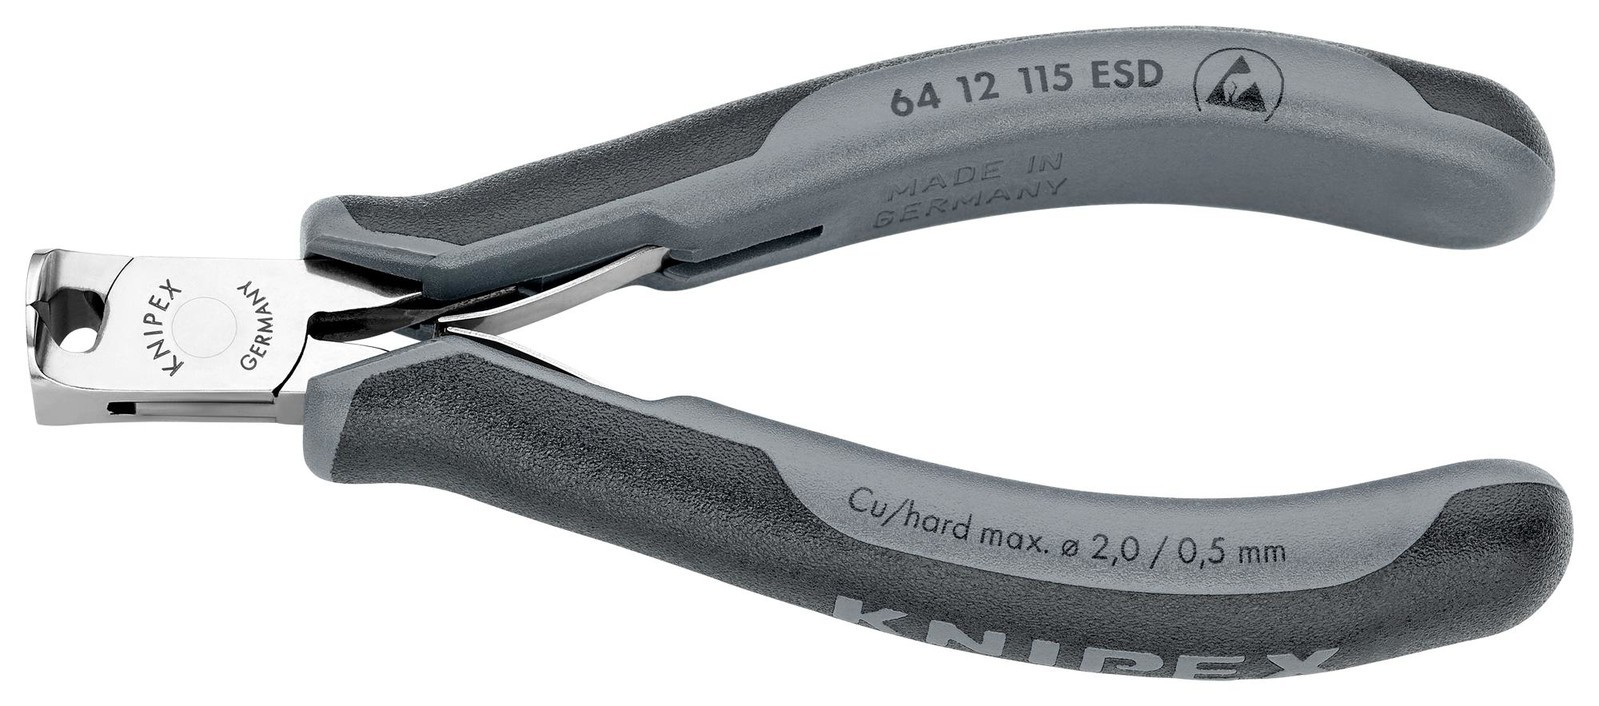 Knipex 64 12 115 Esd End Cutting NIppers